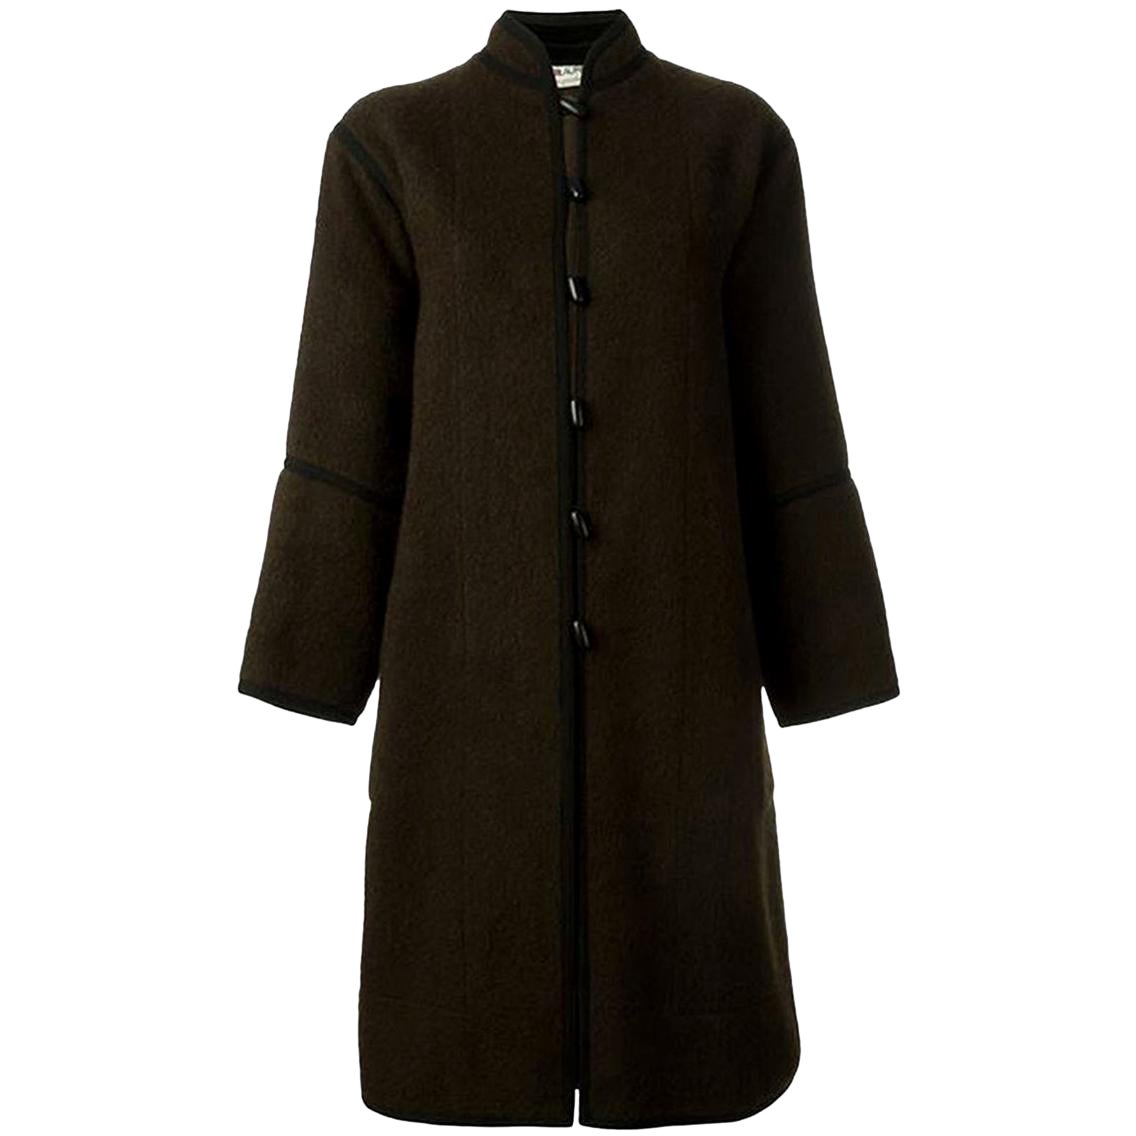 1970 YSL Yves Saint Laurent Brown Wool Coat Russian Collection